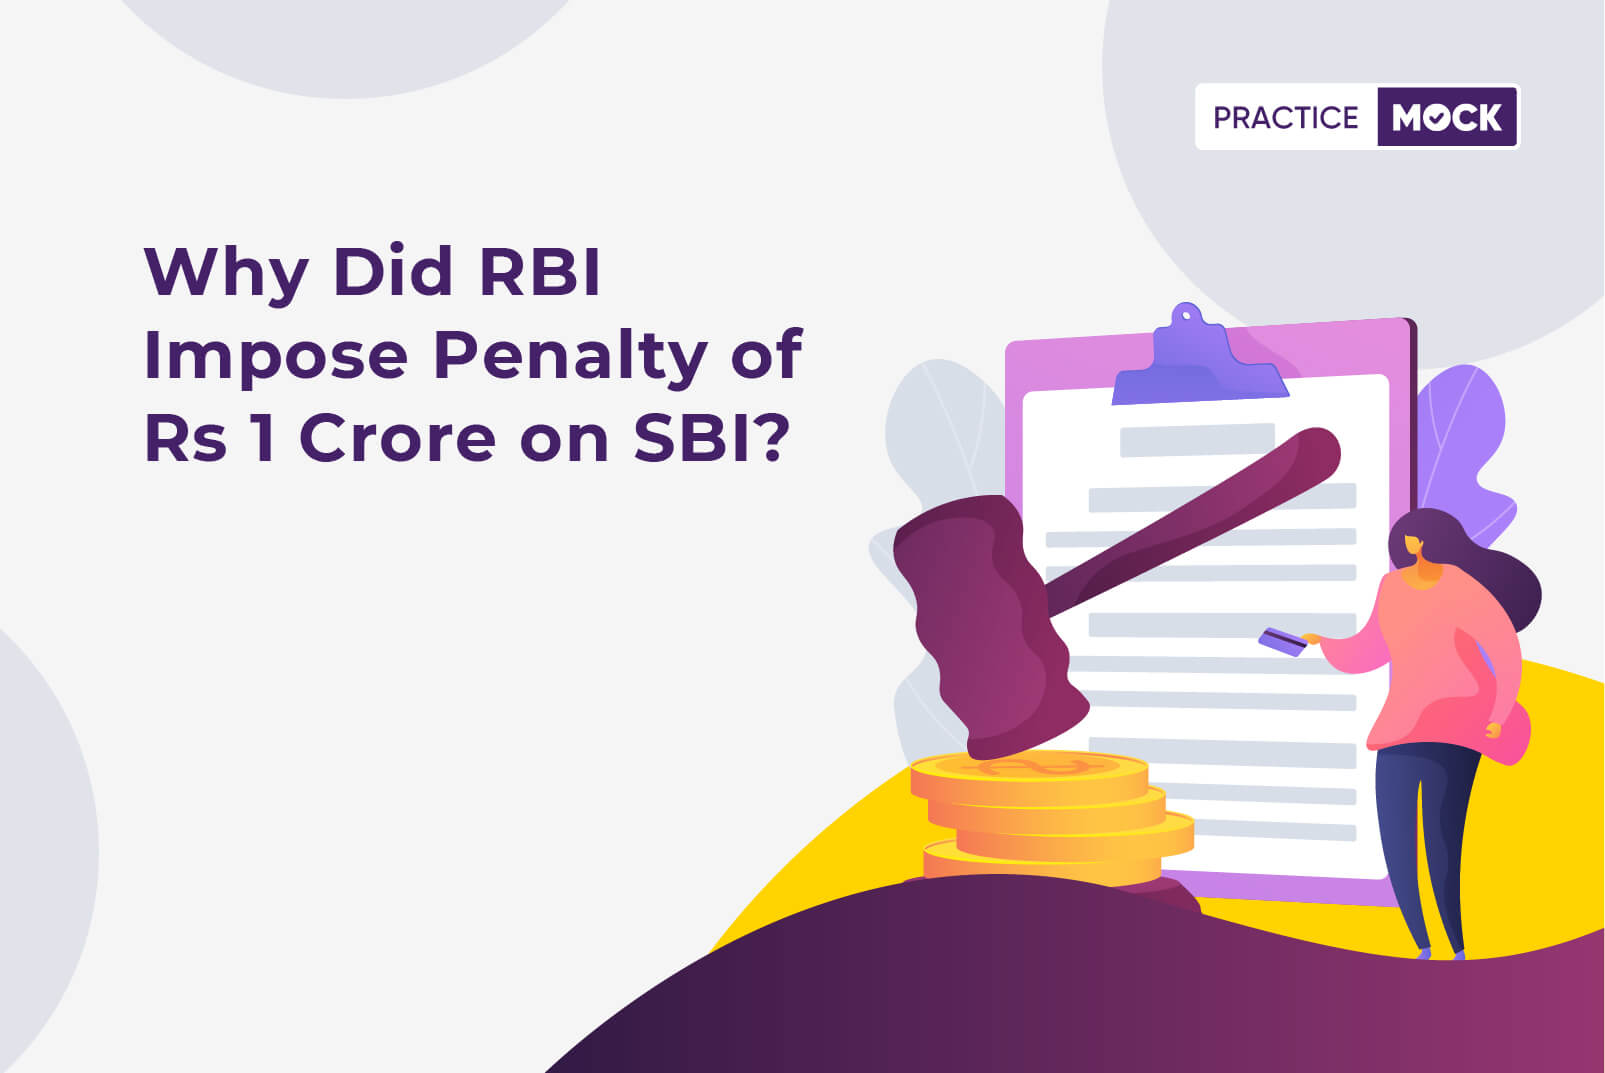 Why did RBI impose penalty of Rs 1 crore on SBI?